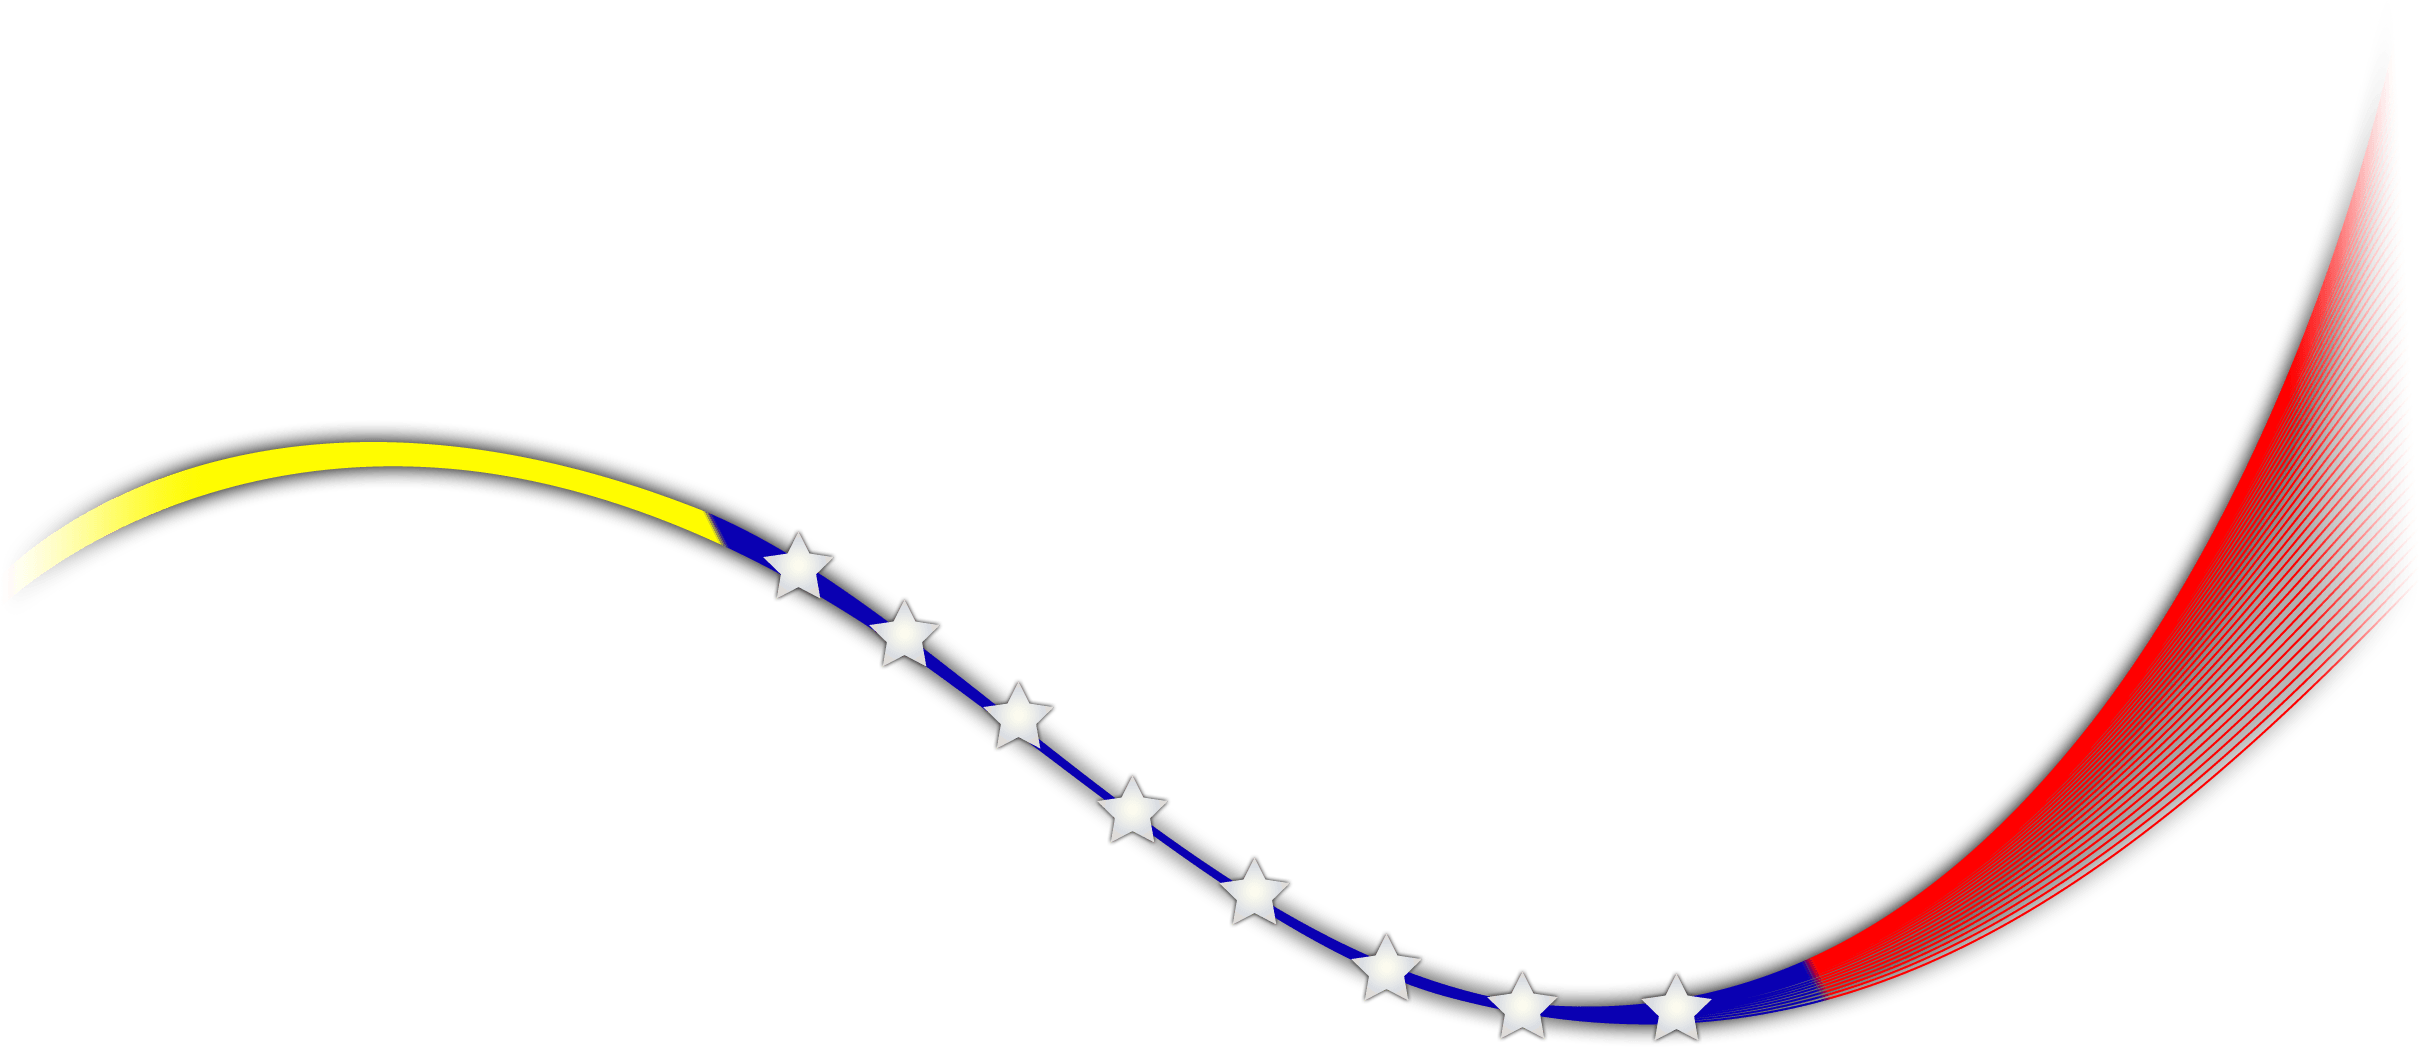 A Line Of Stars And A Blue And Yellow Line